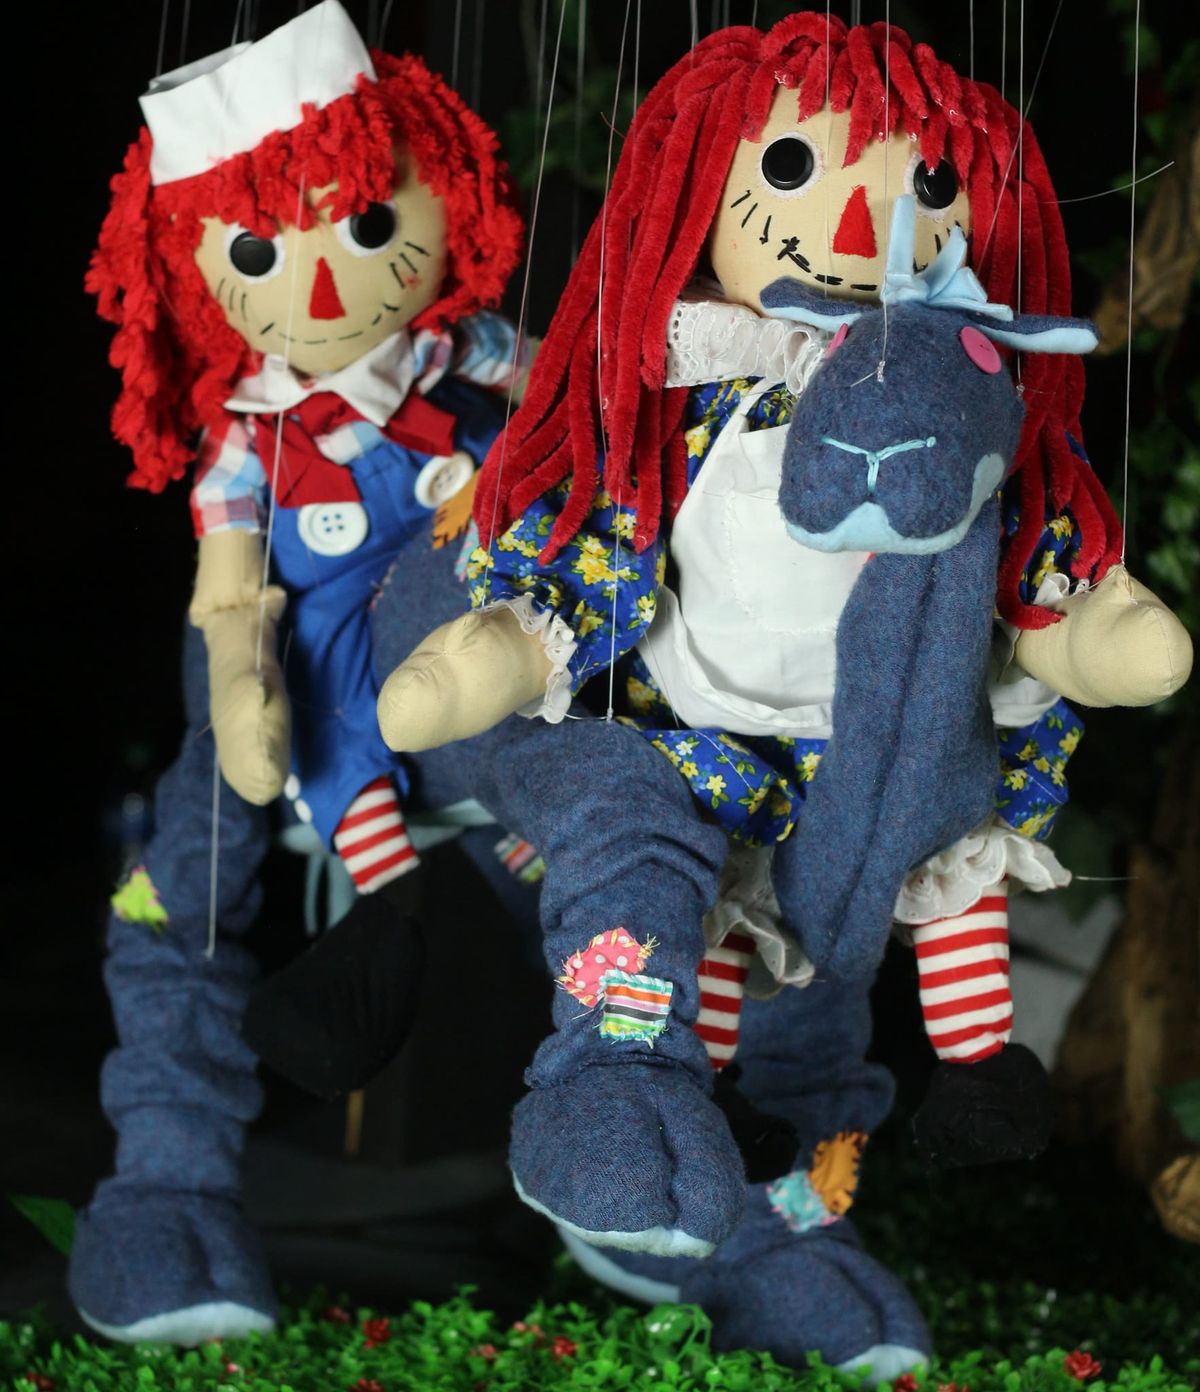 Raggedy Ann and Andy: May's Marionette Monday